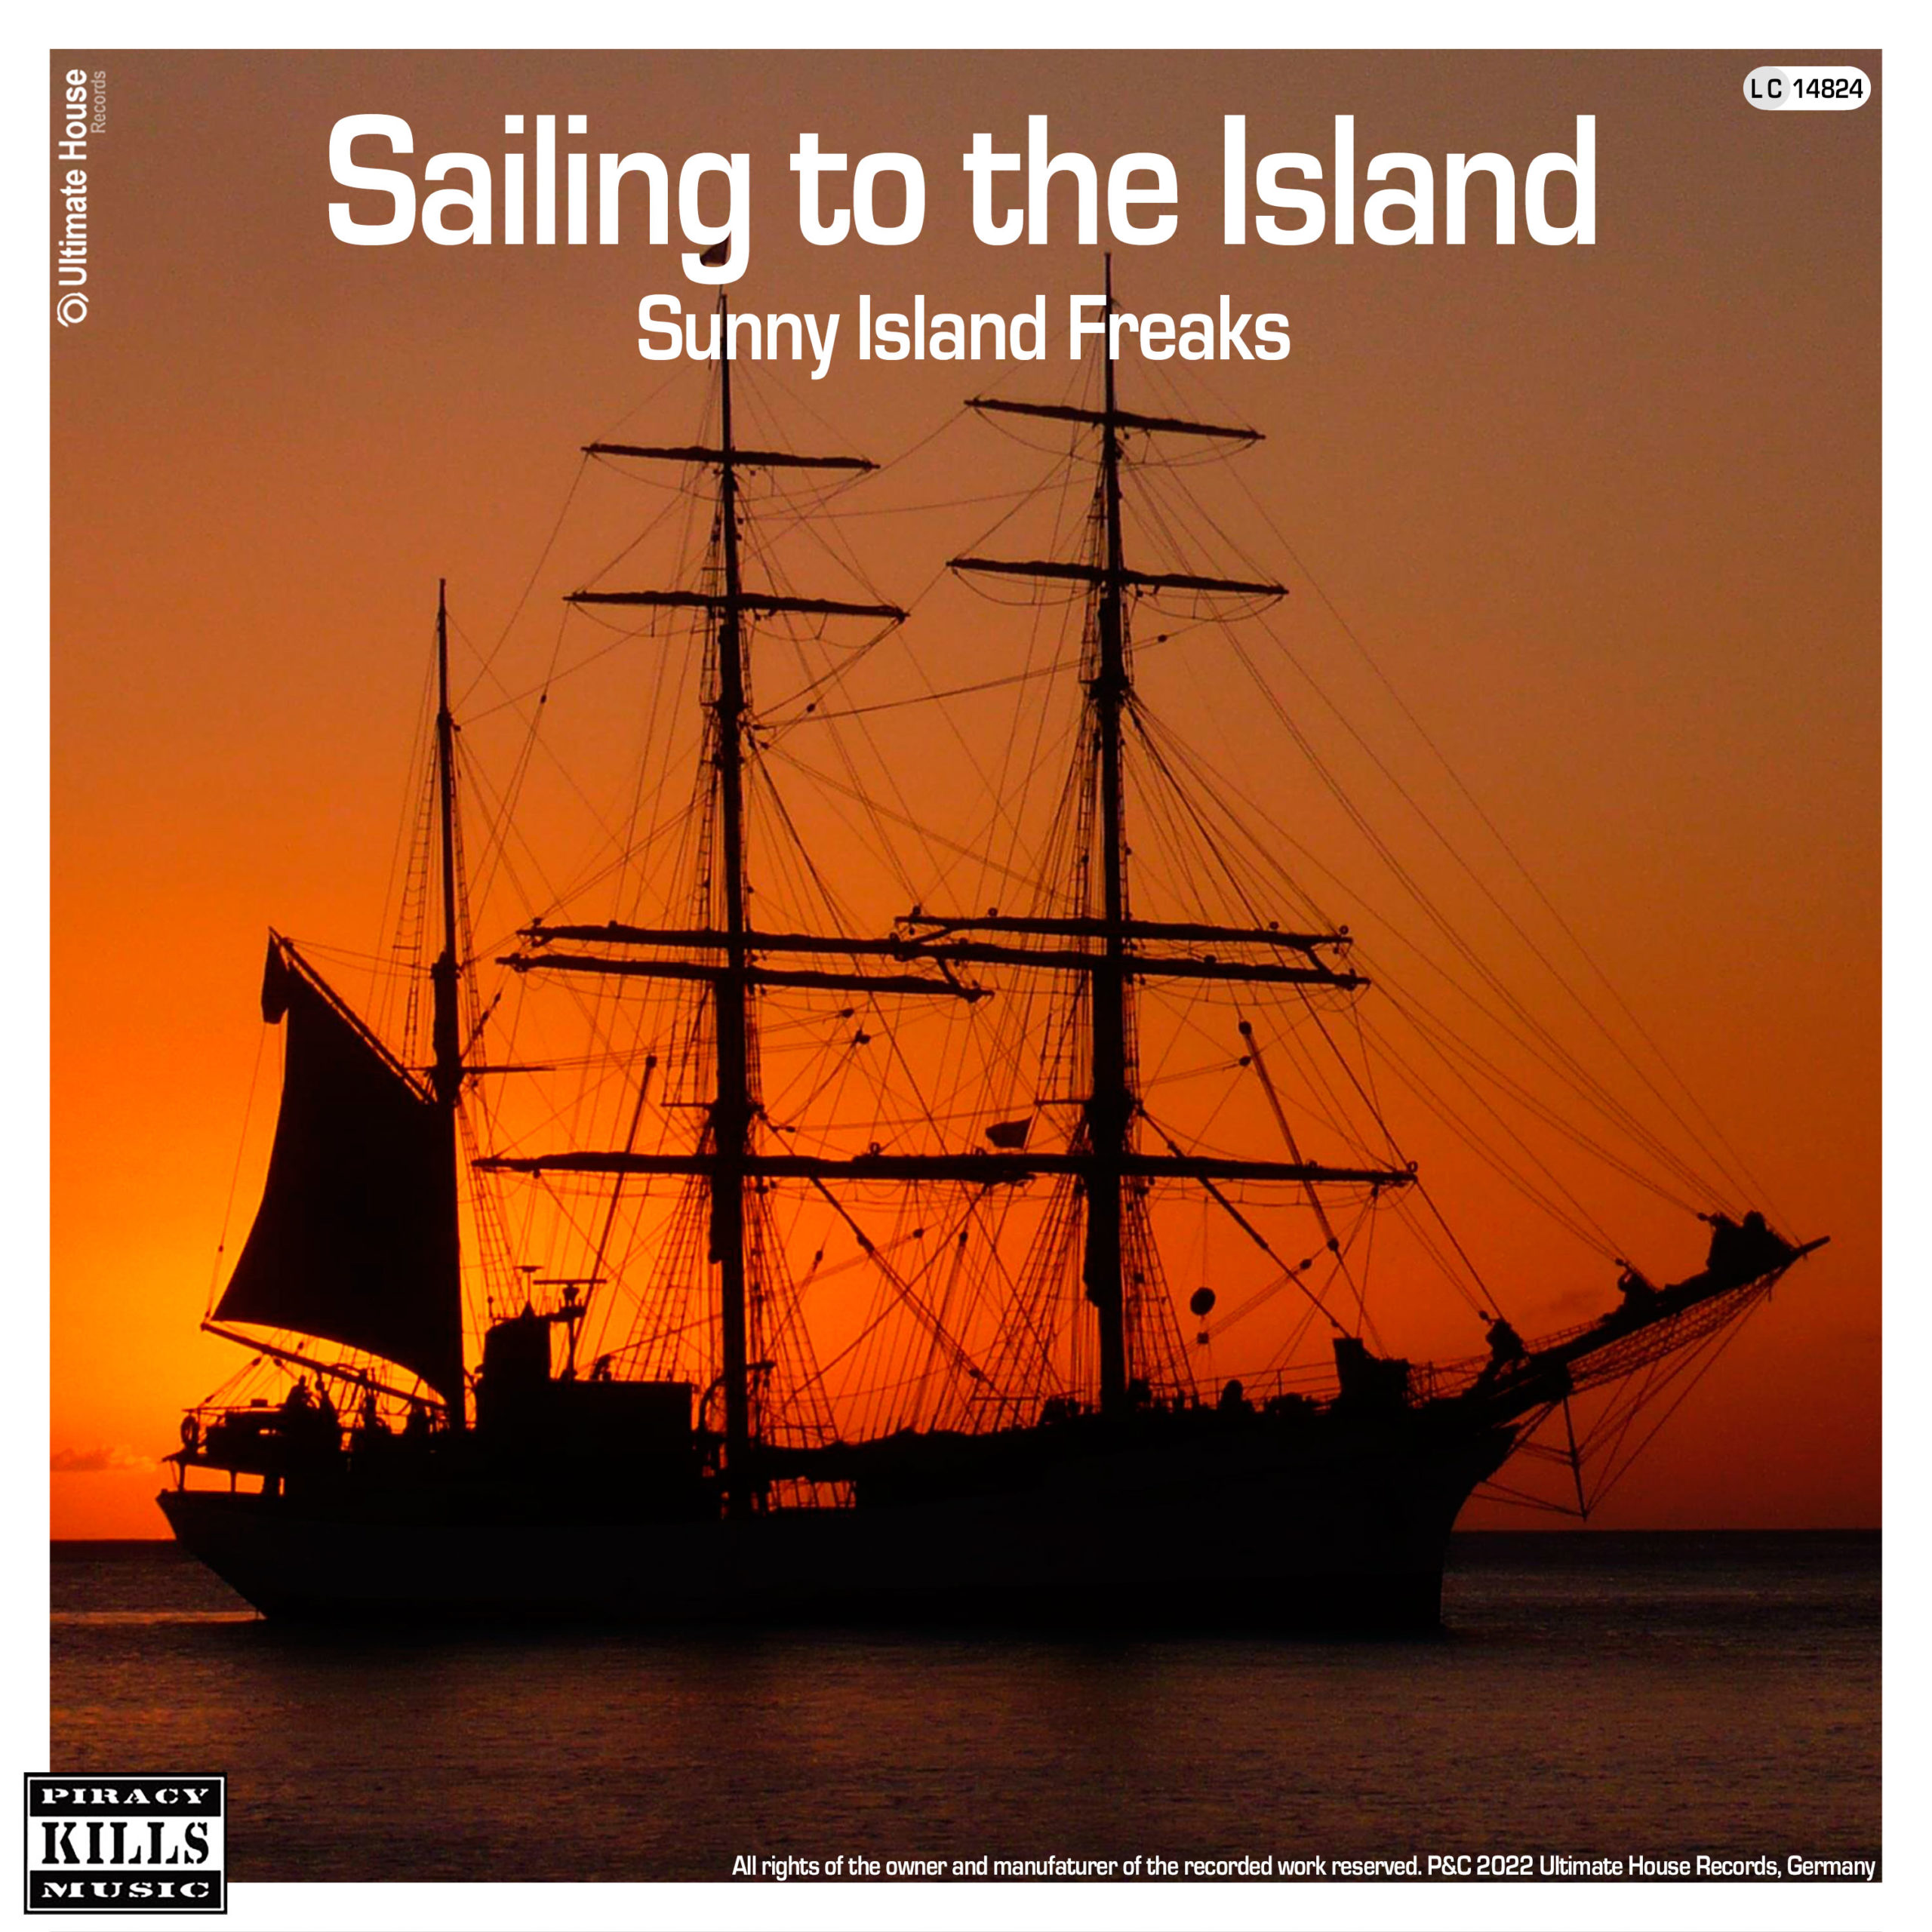 https://www.ultimate-house-records.com/wp-content/uploads/2022/08/162-Sailing_to_the_Island-Cover_3000px_web-scaled.jpg